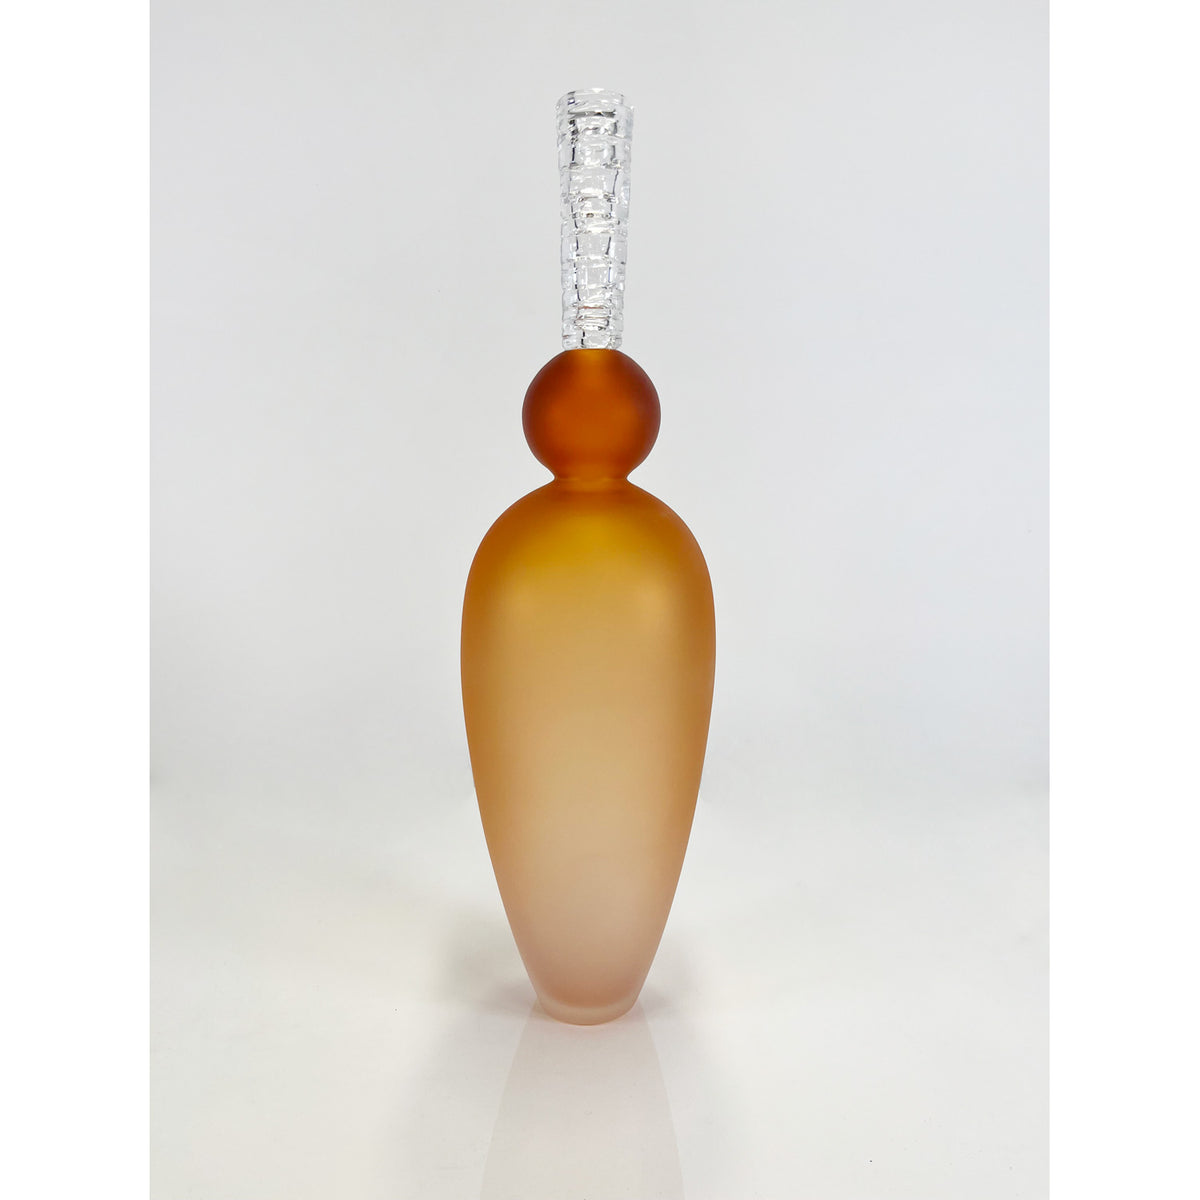 Jaan Andres - Potions Peach Tapered, 19" x 5" x 5"